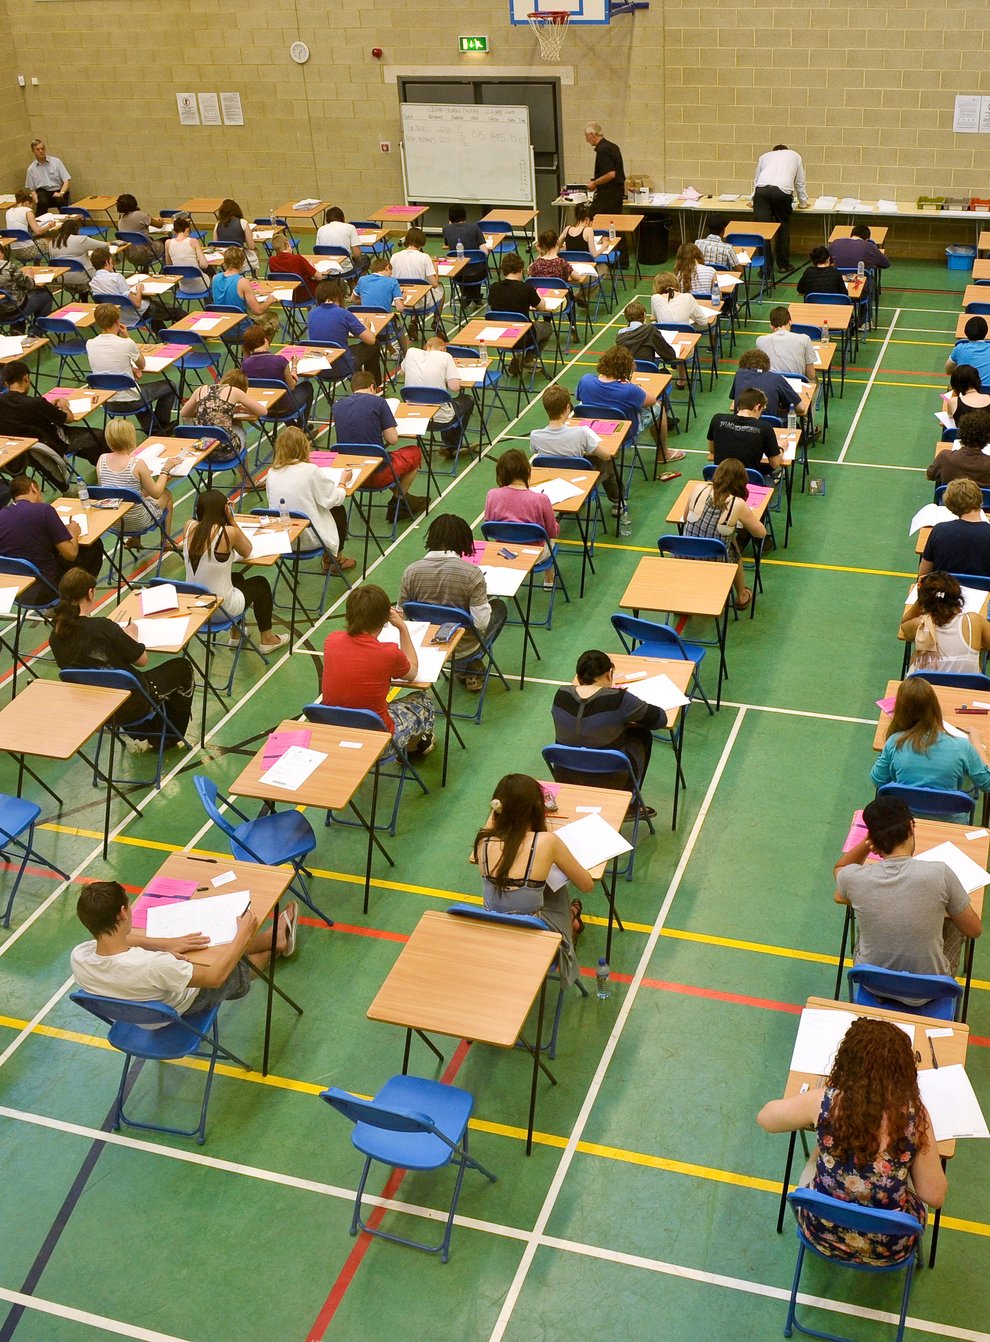 Exams have returned for the first time since 2019 (Ben Birchall/PA)